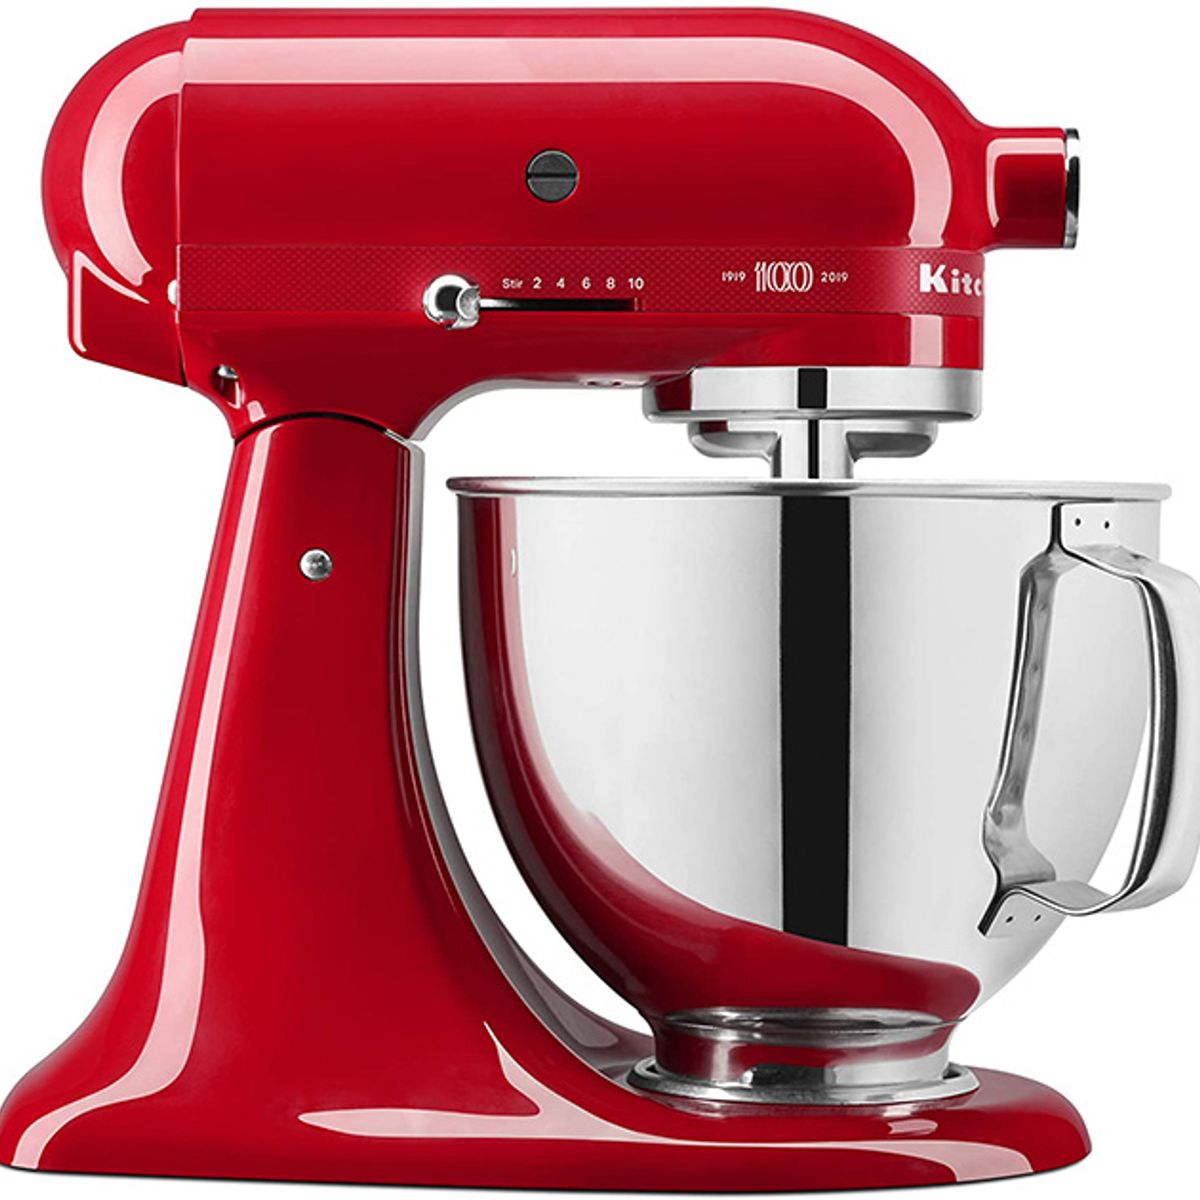 This stand mixer is on hidden clearance at the Ames Walmart for $25 : r/ames